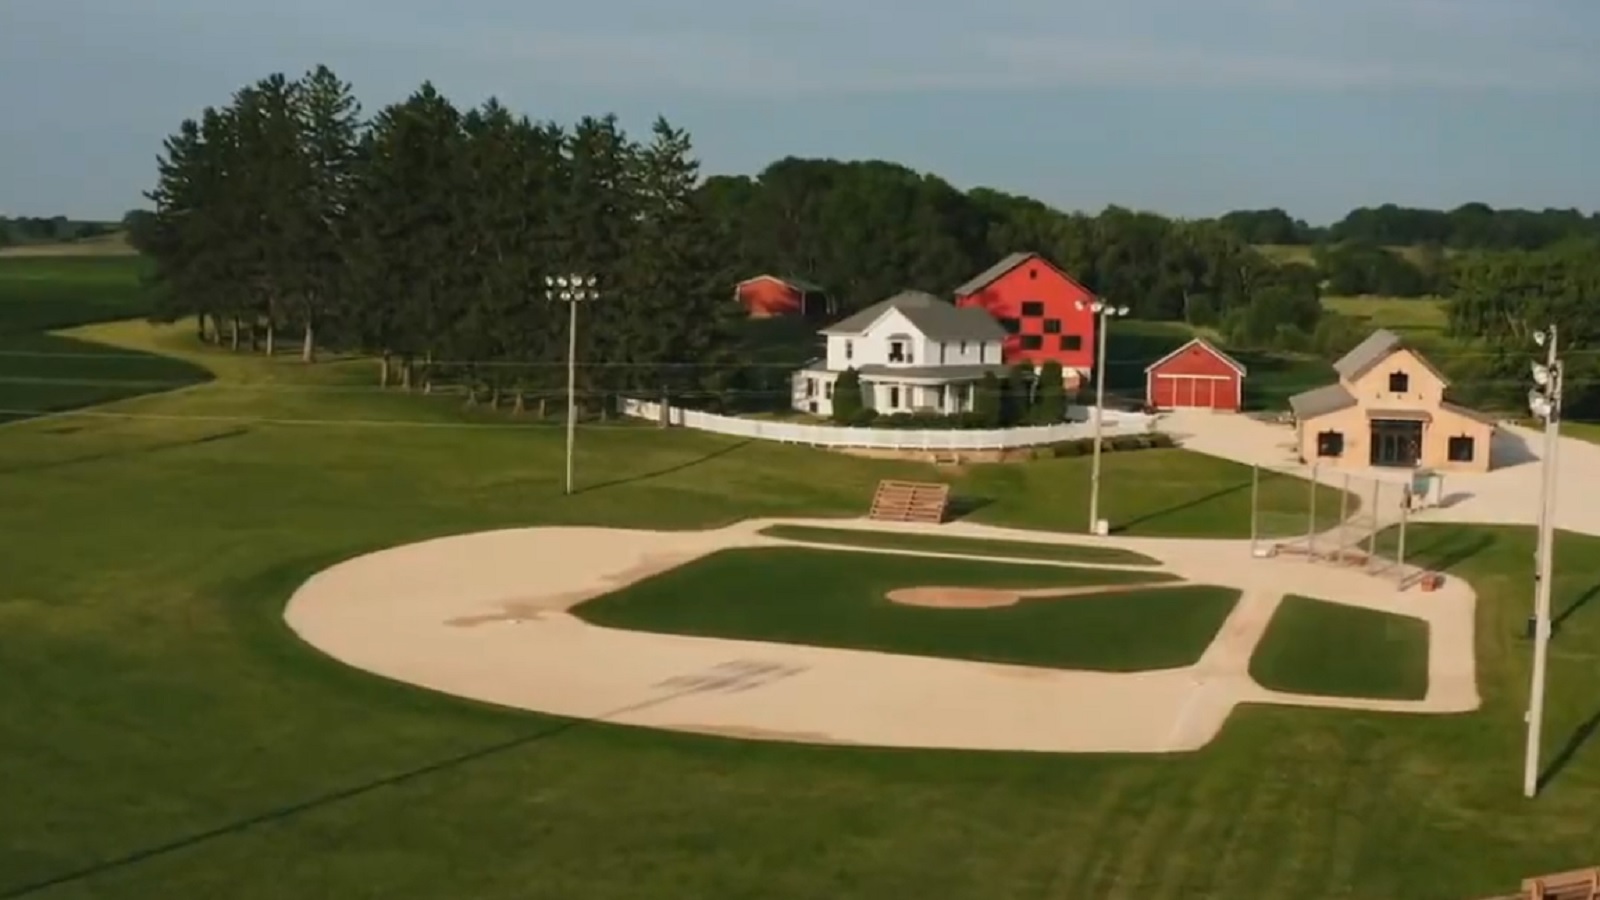 MLB will not return to 'Field of Dreams' in 2023